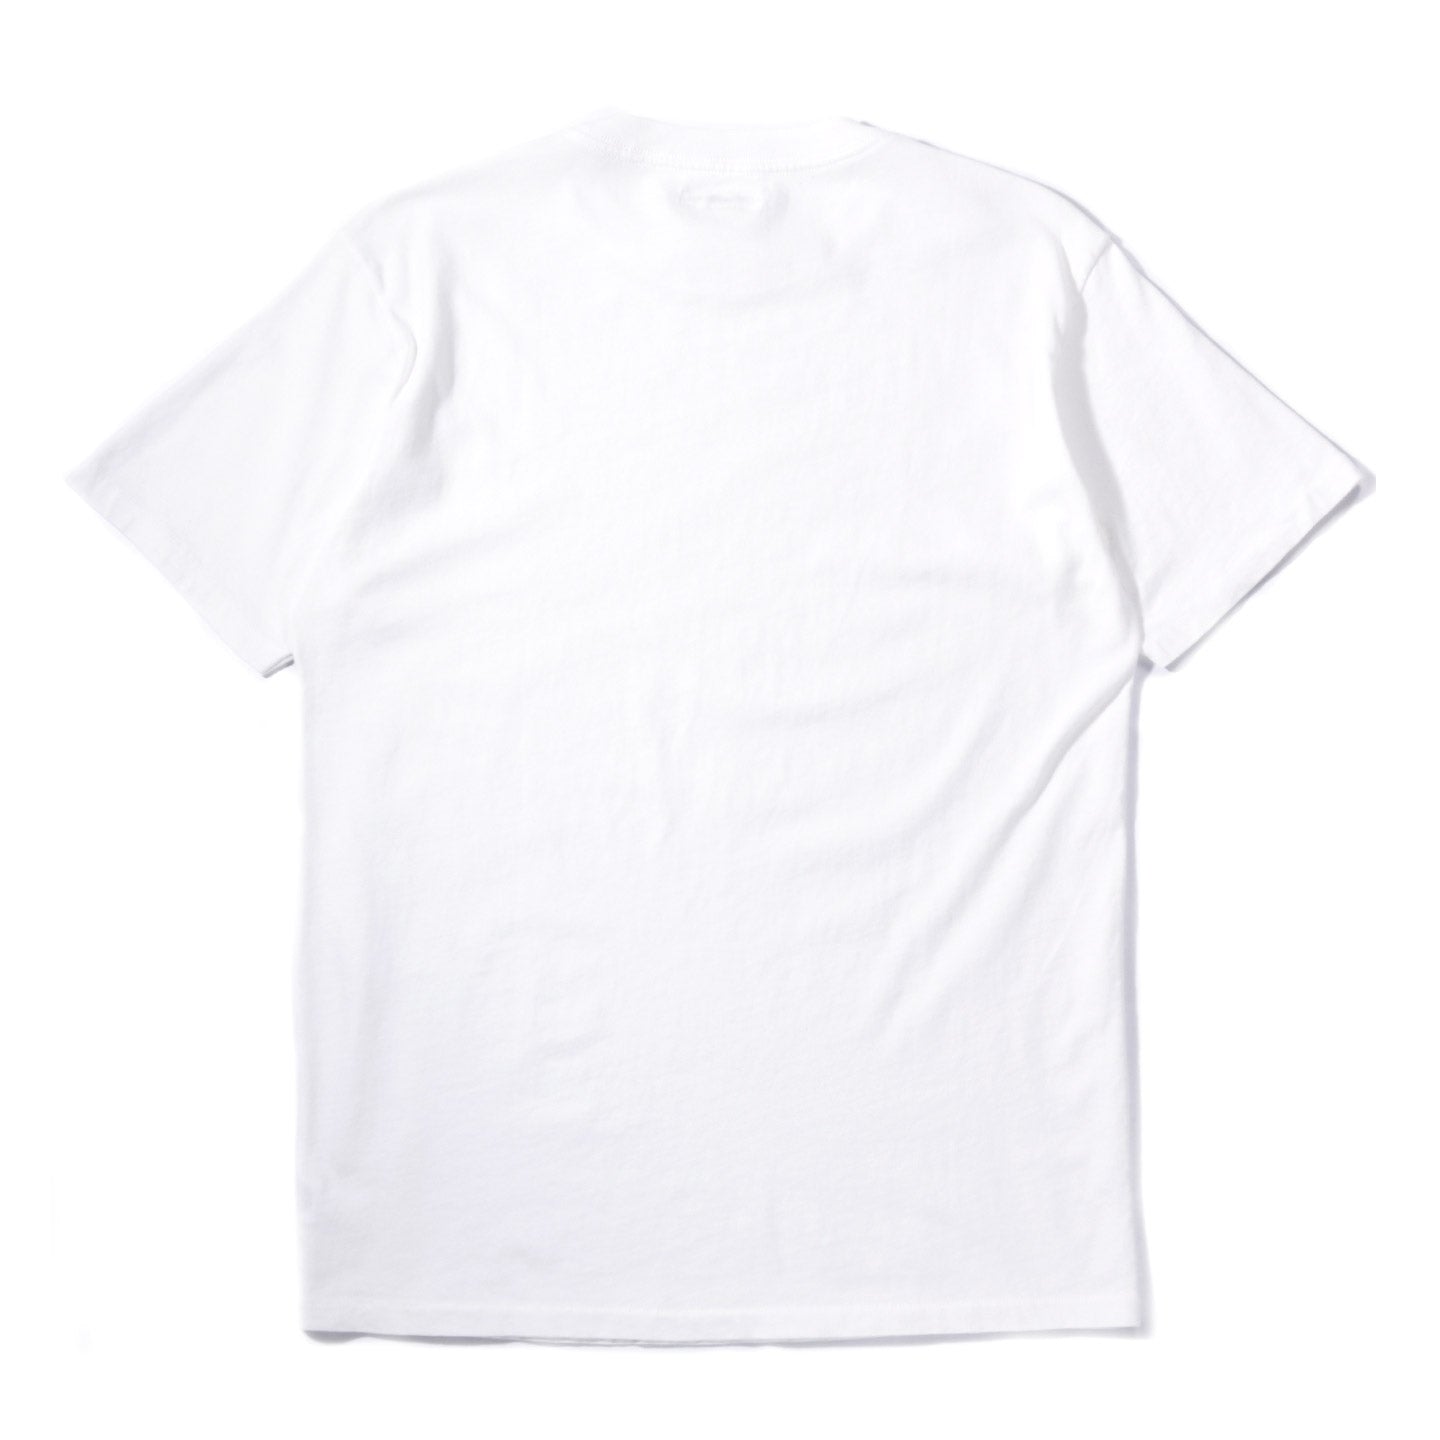 LITE JERSEY - NATURAL – LADY WHITE CO.